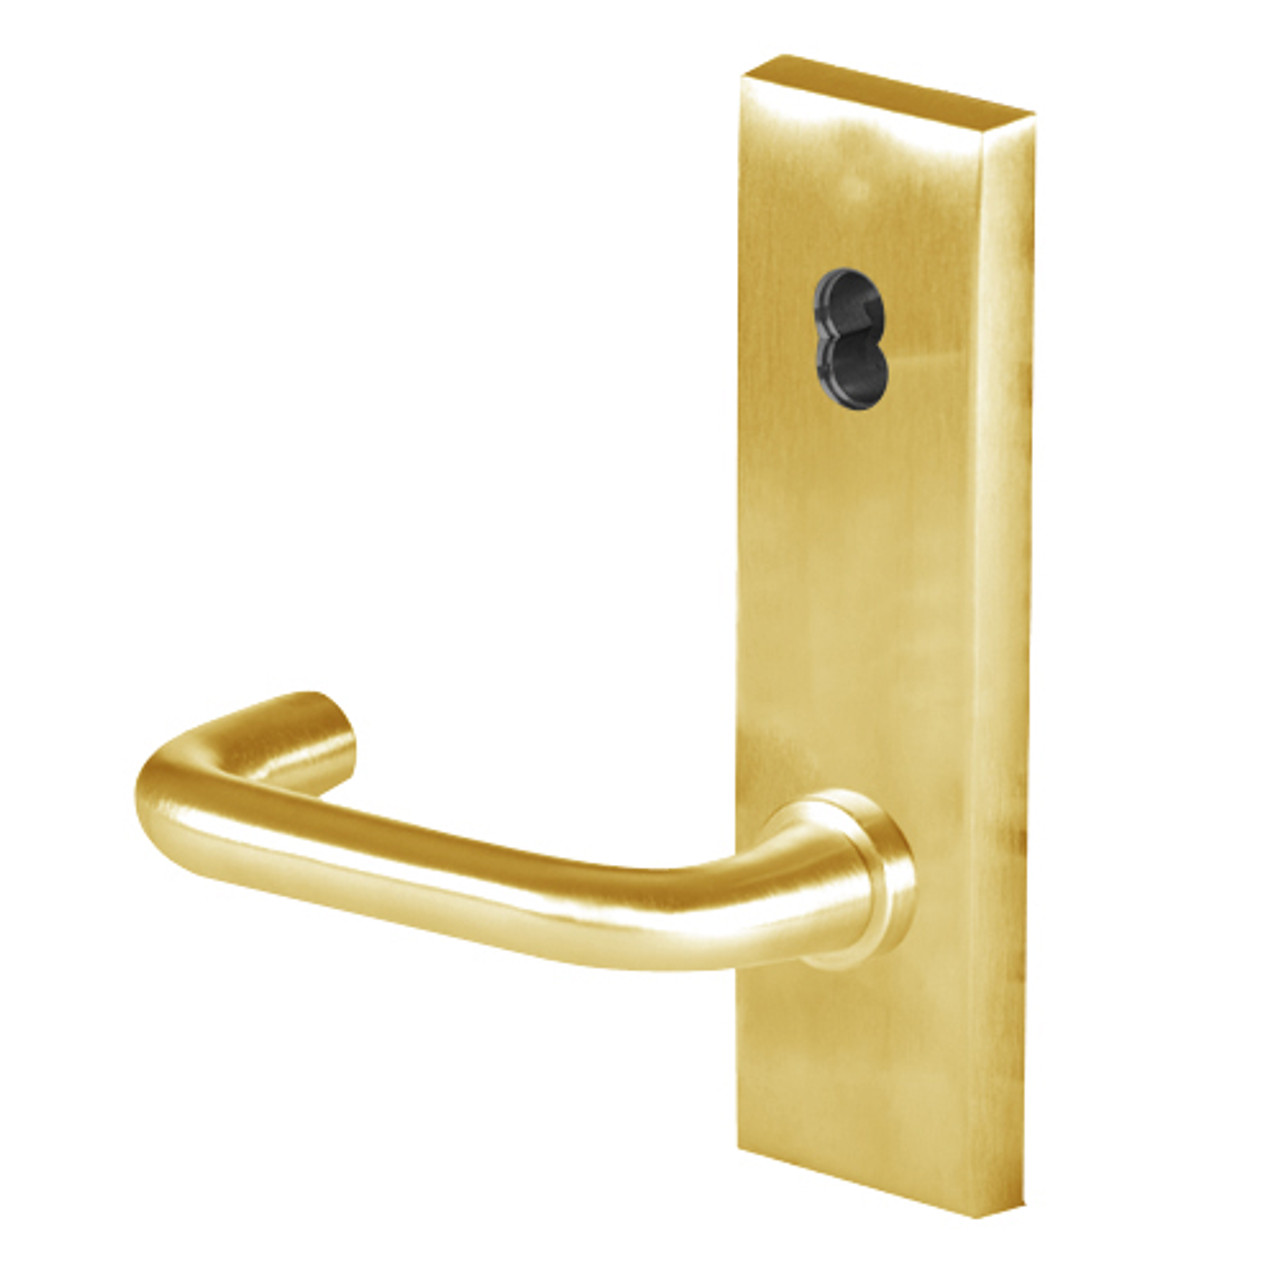 45H7B3N605 Best 40H Series Entrance with Deadbolt Heavy Duty Mortise Lever Lock with Solid Tube Return Style in Bright Brass